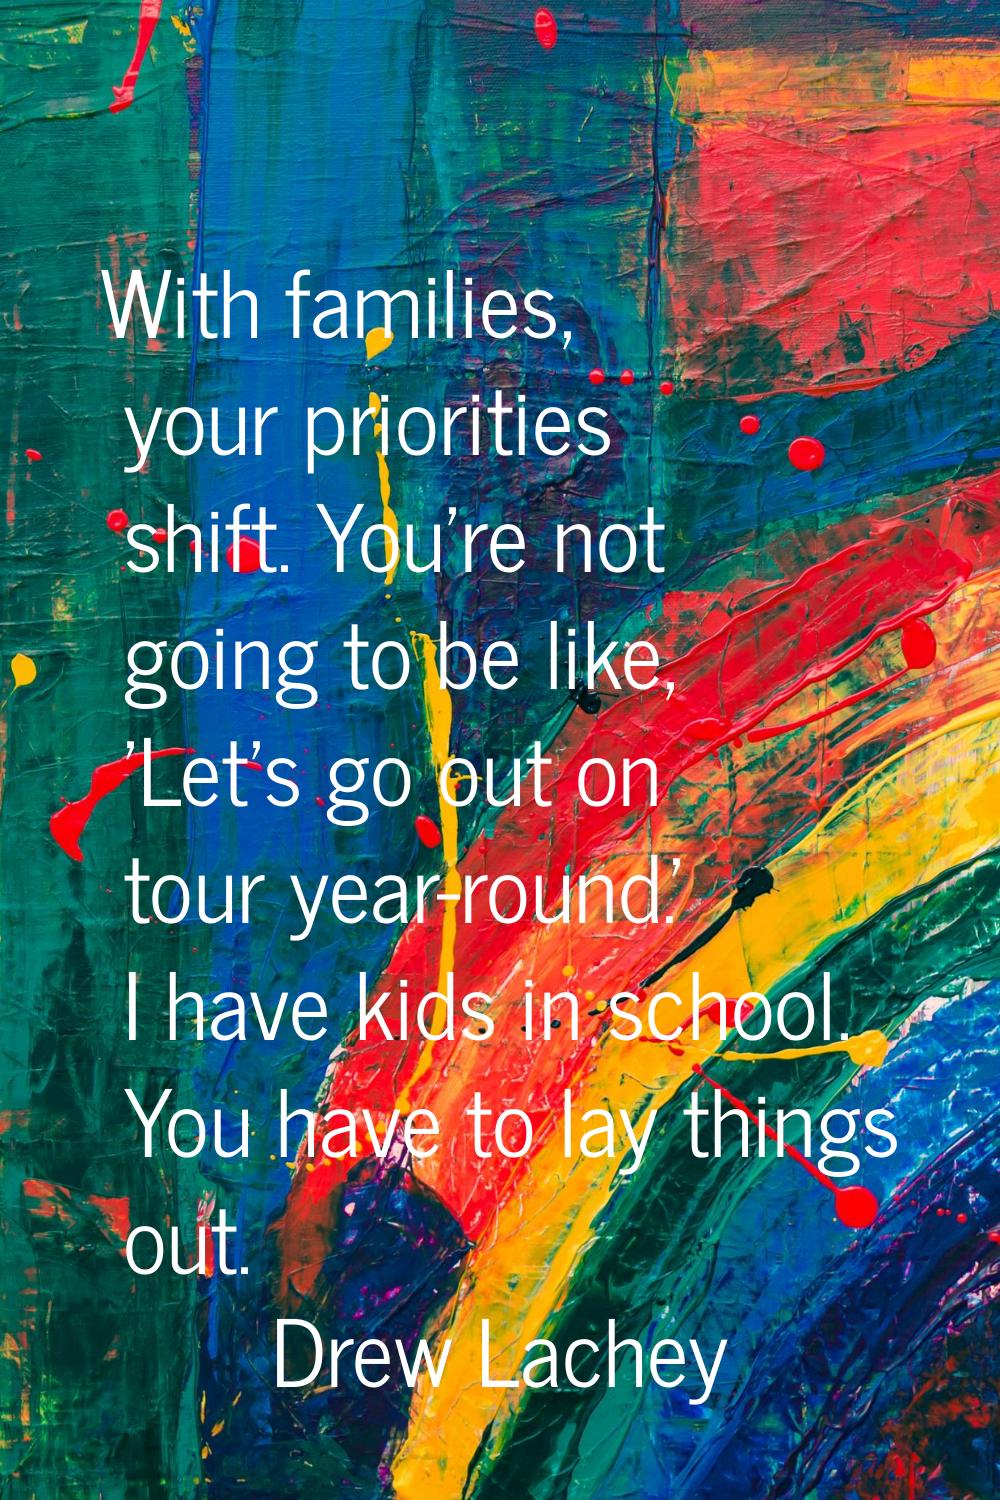 With families, your priorities shift. You're not going to be like, 'Let's go out on tour year-round